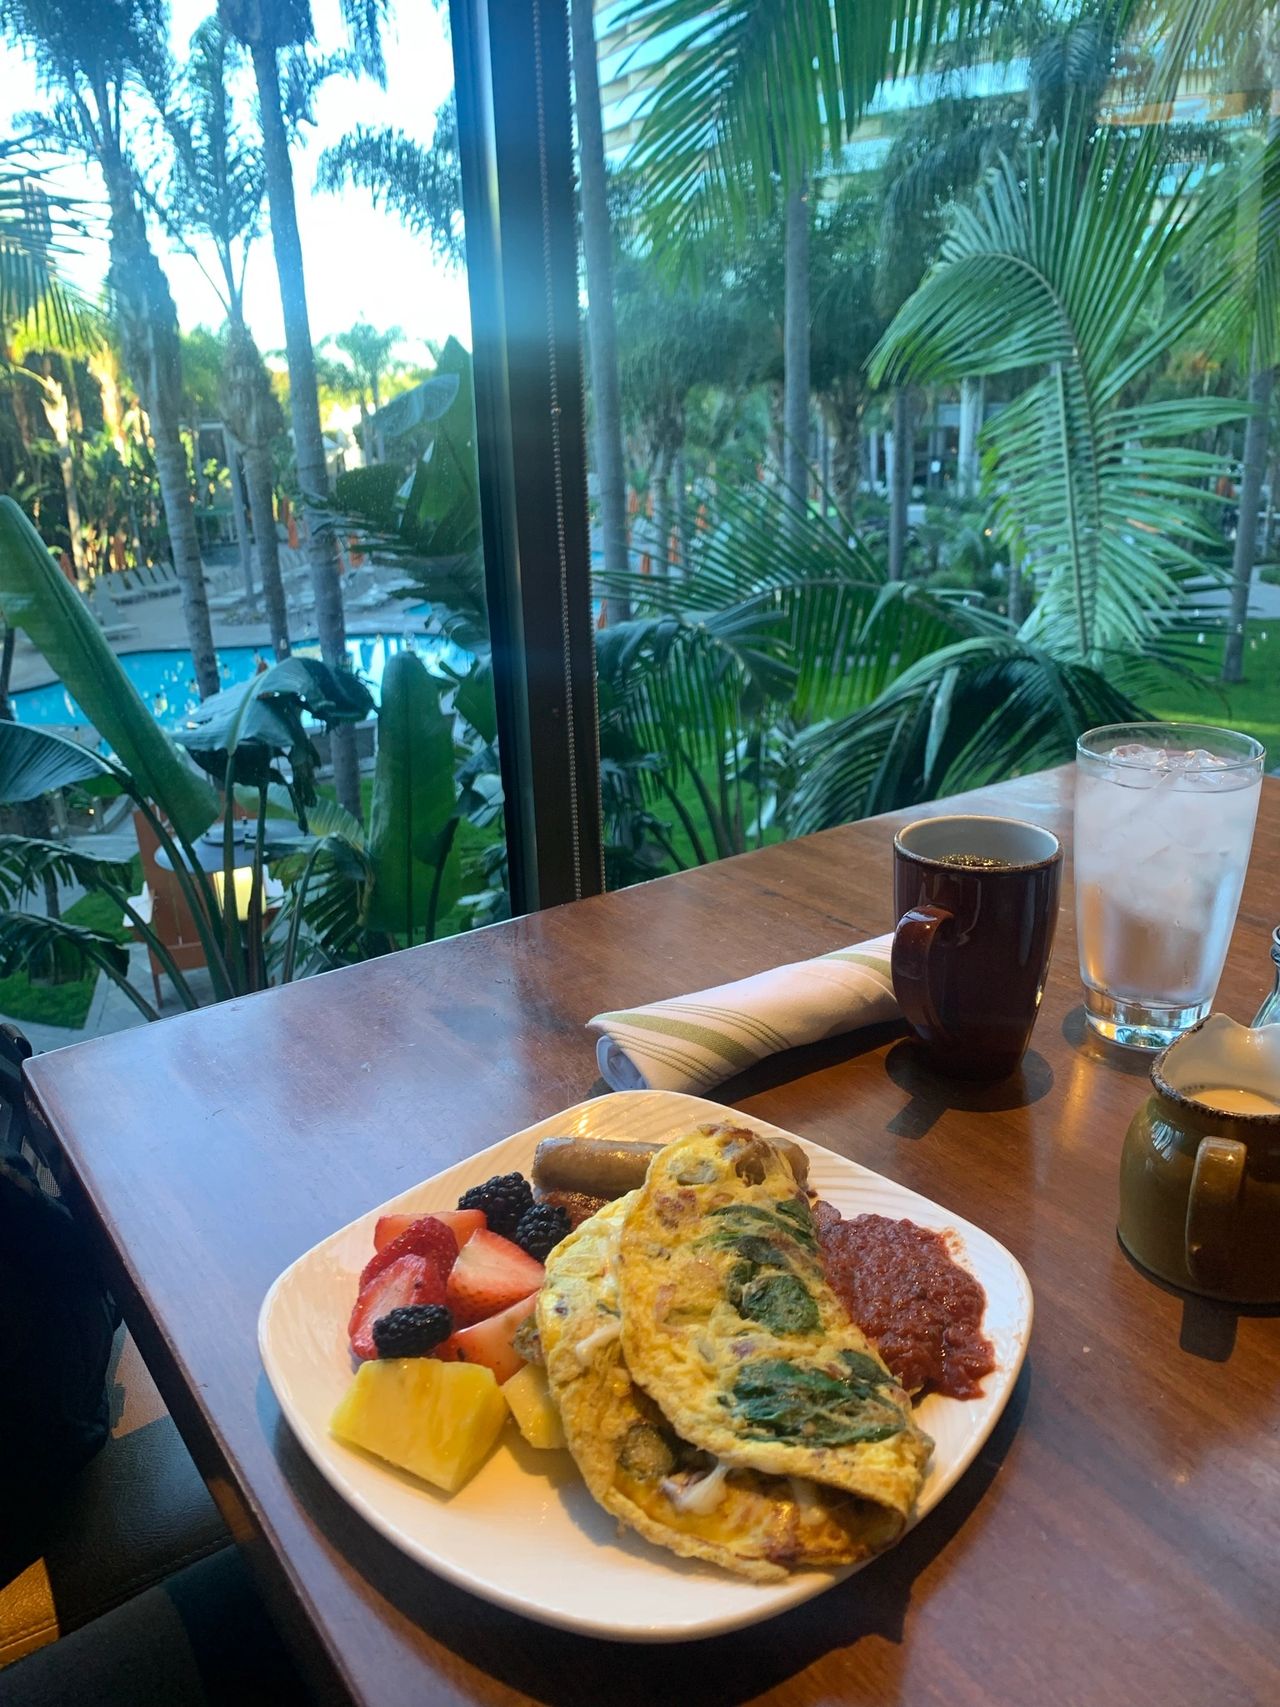 Make your own omelet at Marina Kitchen